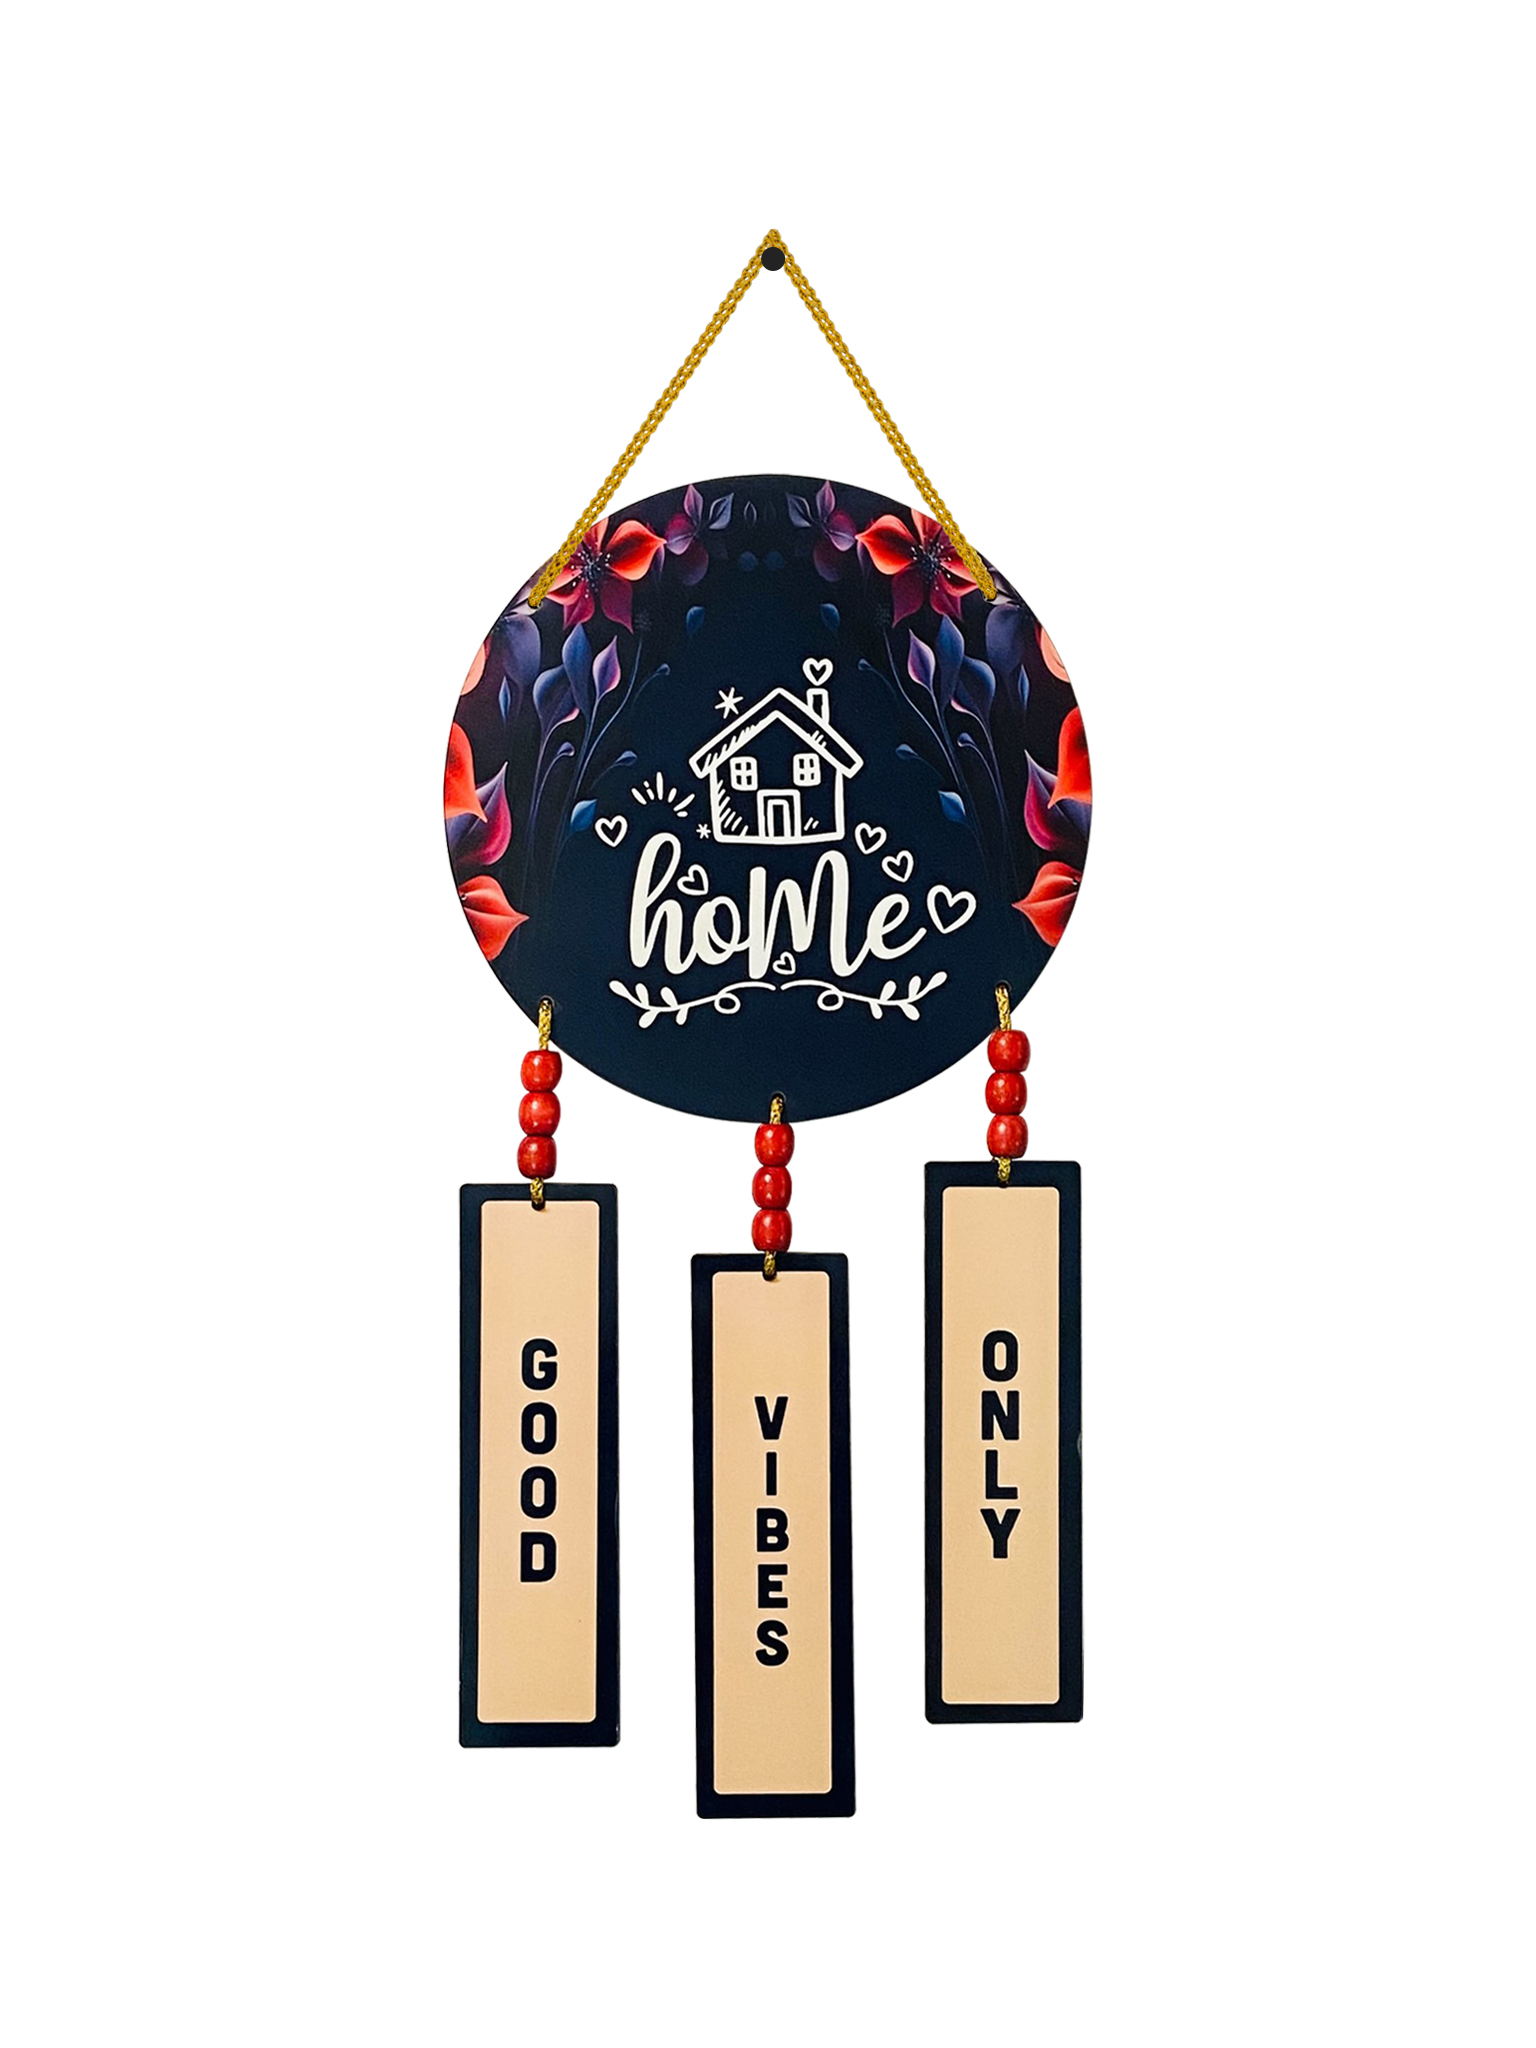 Positive Energy: Good Vibes Only Wooden Wall Hanging